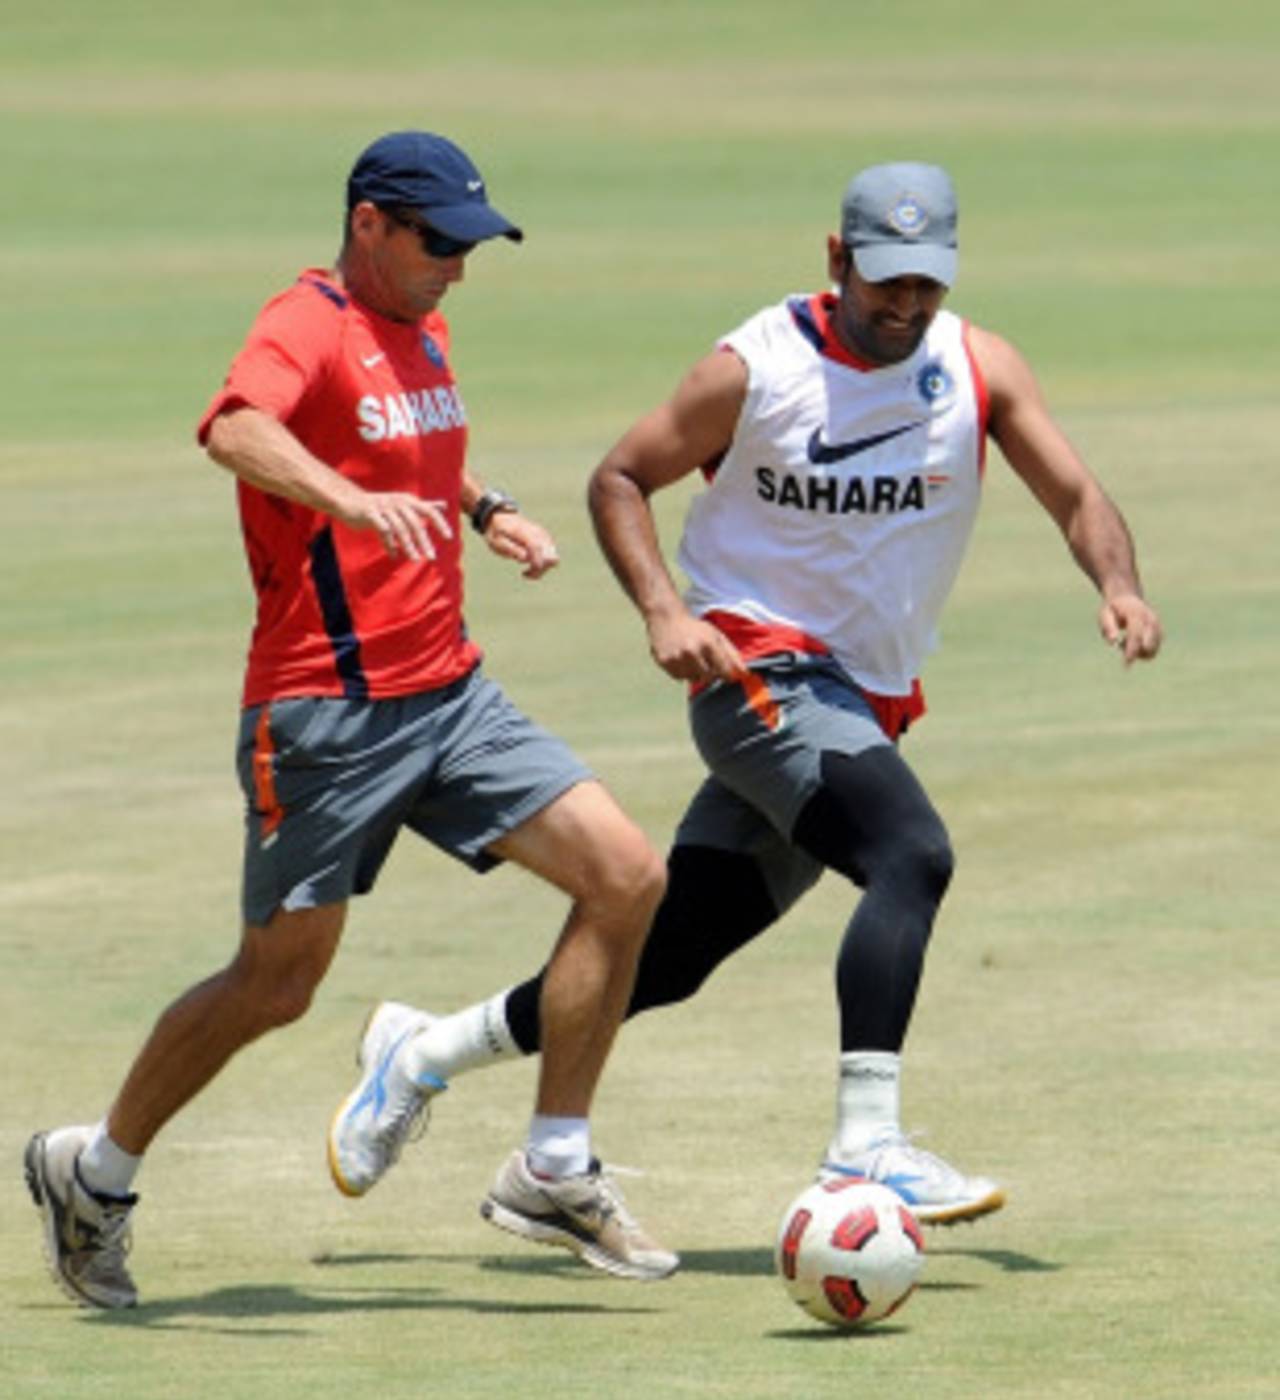 Gary Kirsten takes on MS Dhoni during a warm-up game of football, Chennai, March 18, 2011